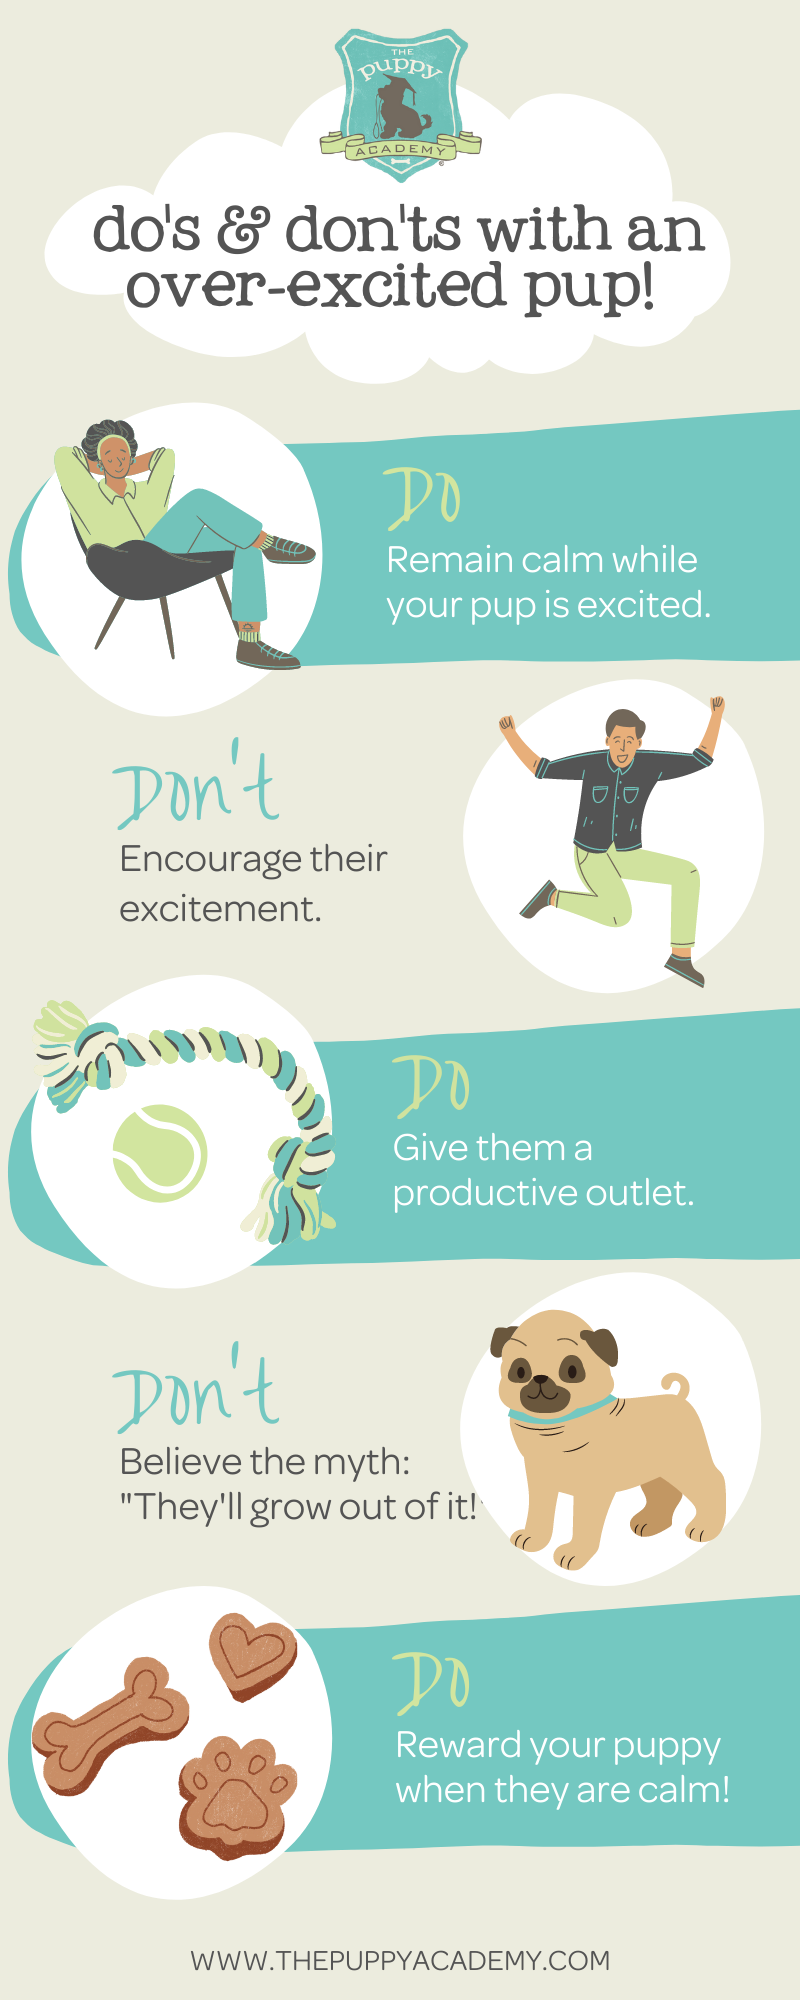 How To Calm An Over-Excited Puppy! — The Puppy Academy